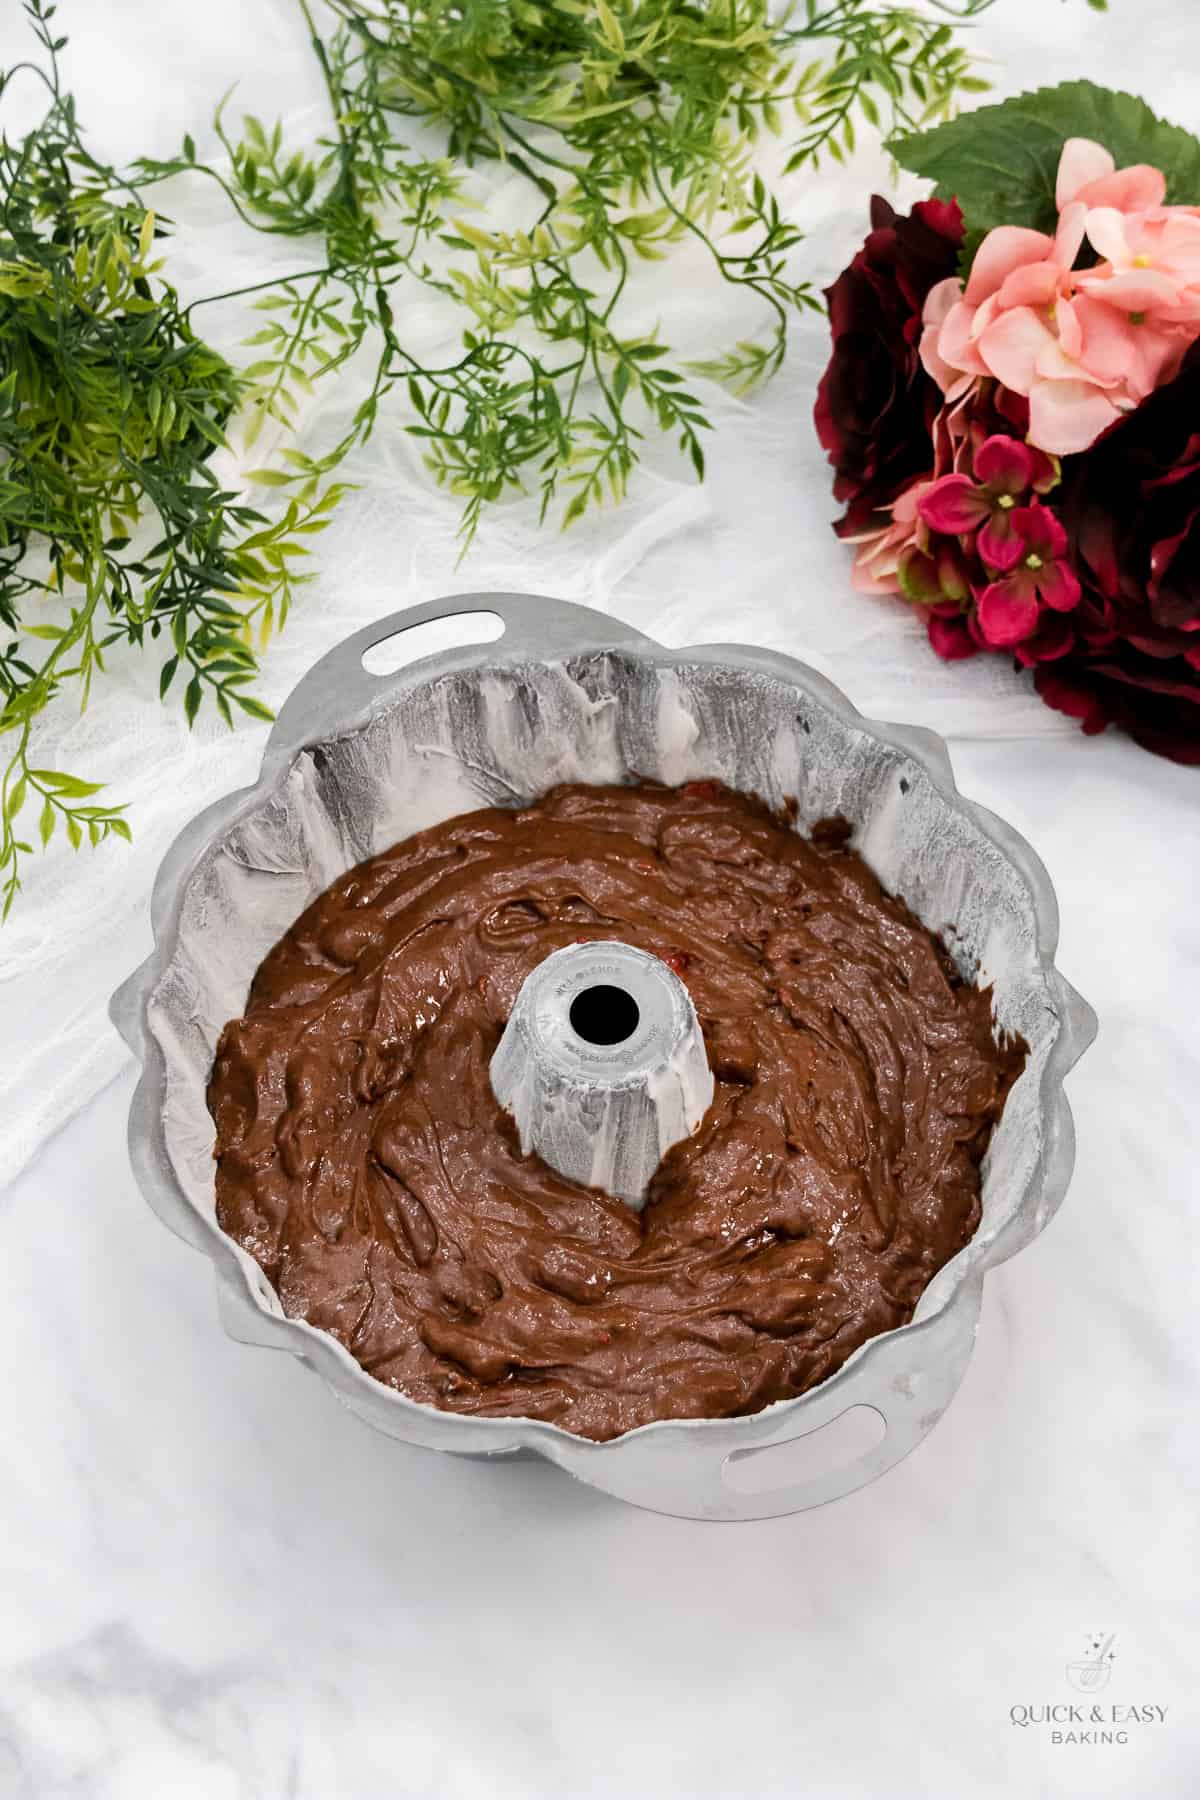 Chocolate Cherry cake batter smoothed into a bundt pan.